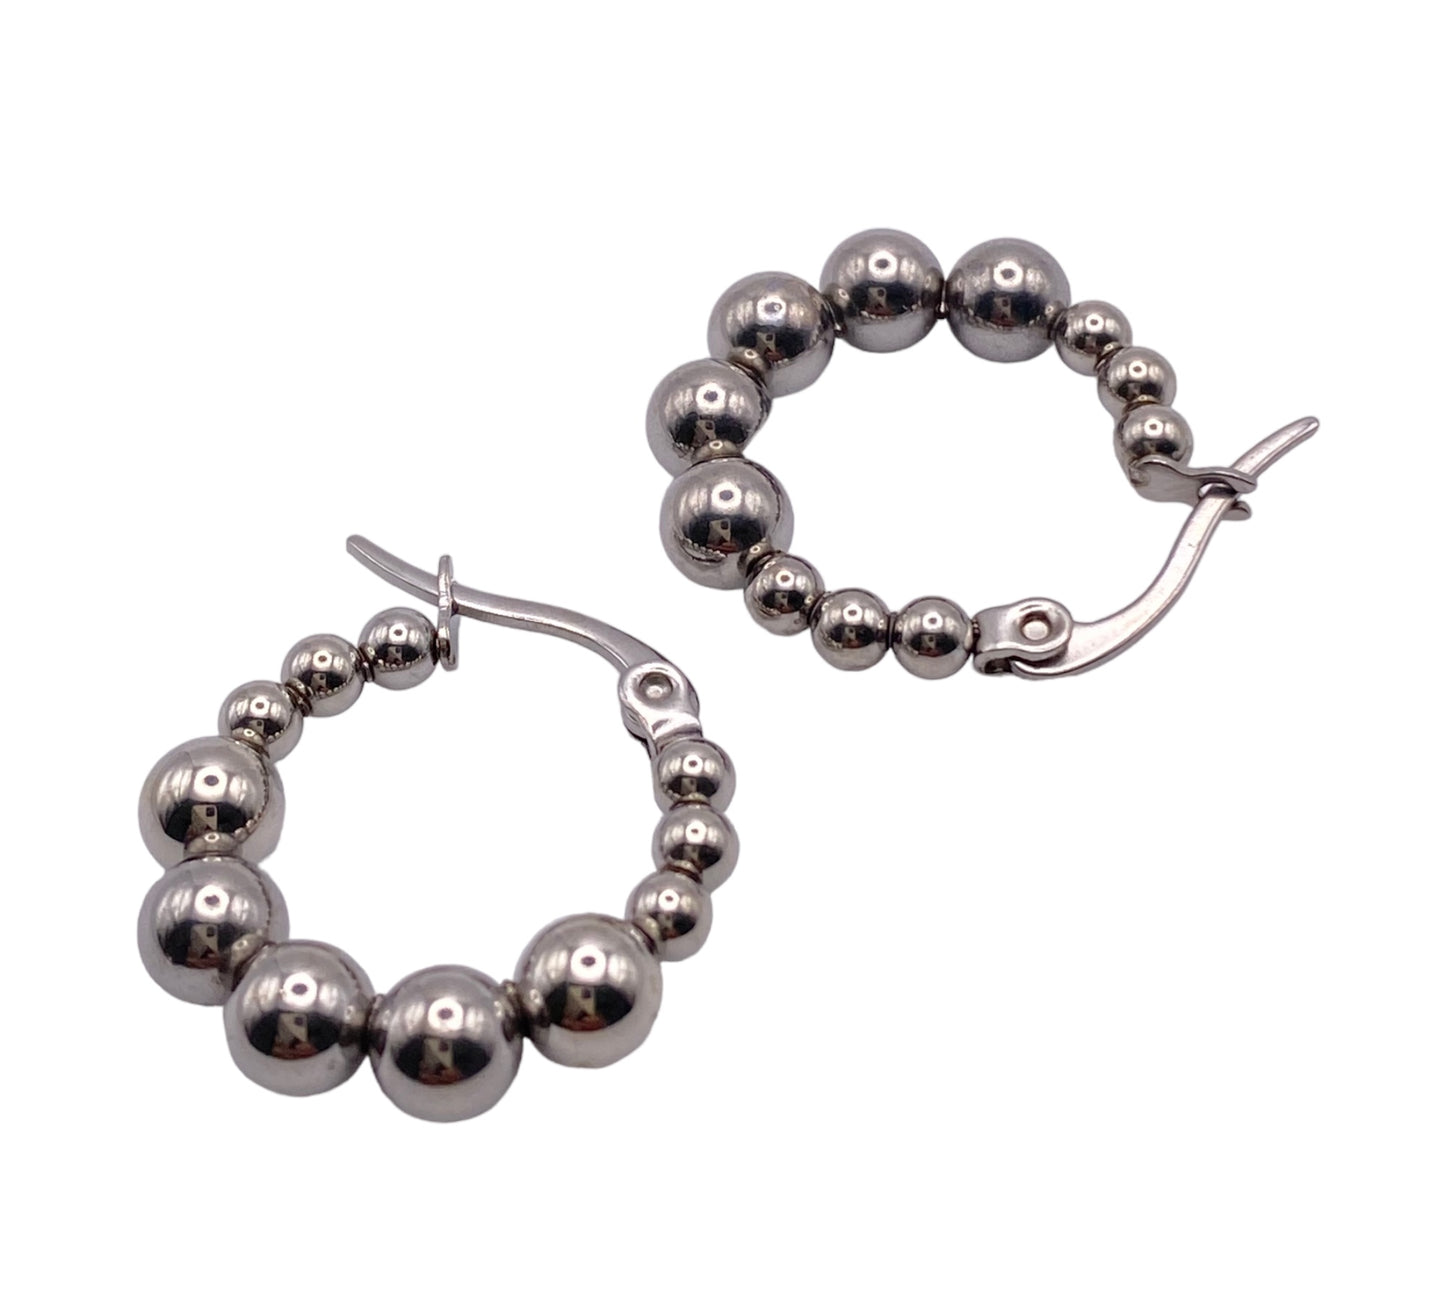 "VERDI" silver colored hoop earrings surrounded with steel beads